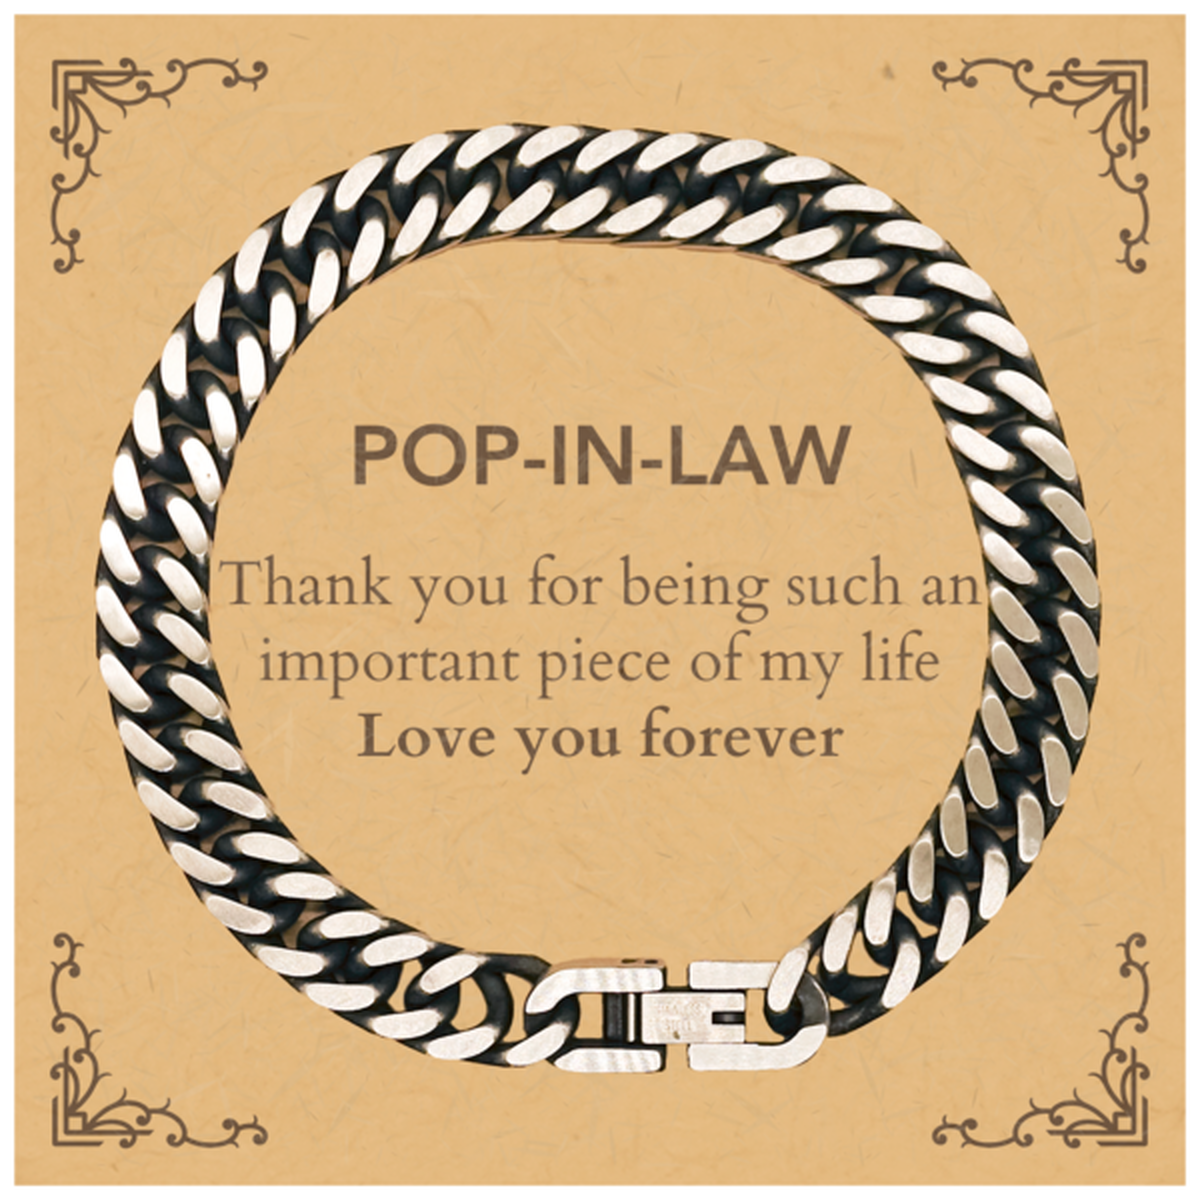 Appropriate Pop-in-law Cuban Link Chain Bracelet Epic Birthday Gifts for Pop-in-law Thank you for being such an important piece of my life Pop-in-law Christmas Mothers Fathers Day